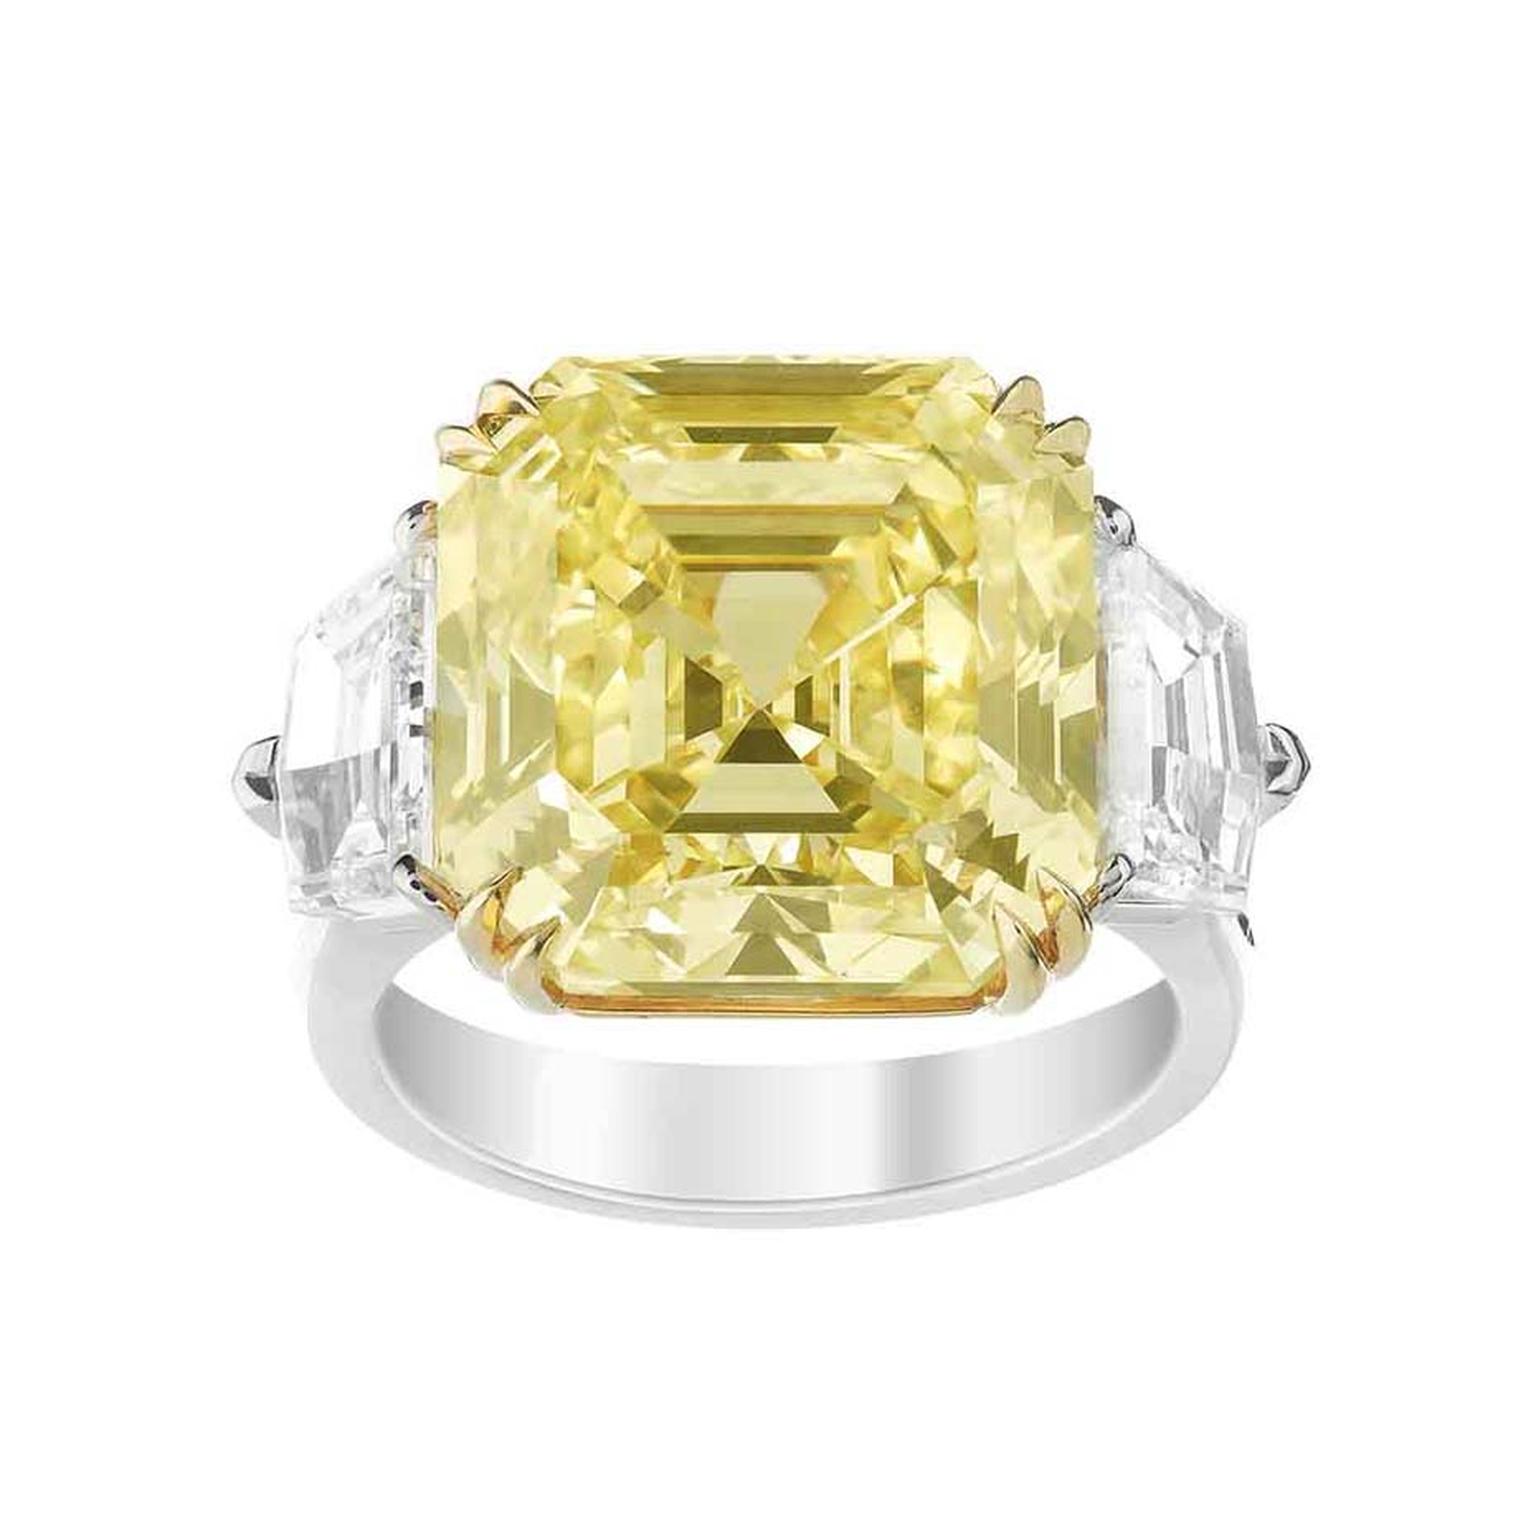 Boucheron Jaune Imperial 15.00ct emerald cut yellow diamond engagement ring in white gold and platinum flanked by two colourless diamonds (£POA).